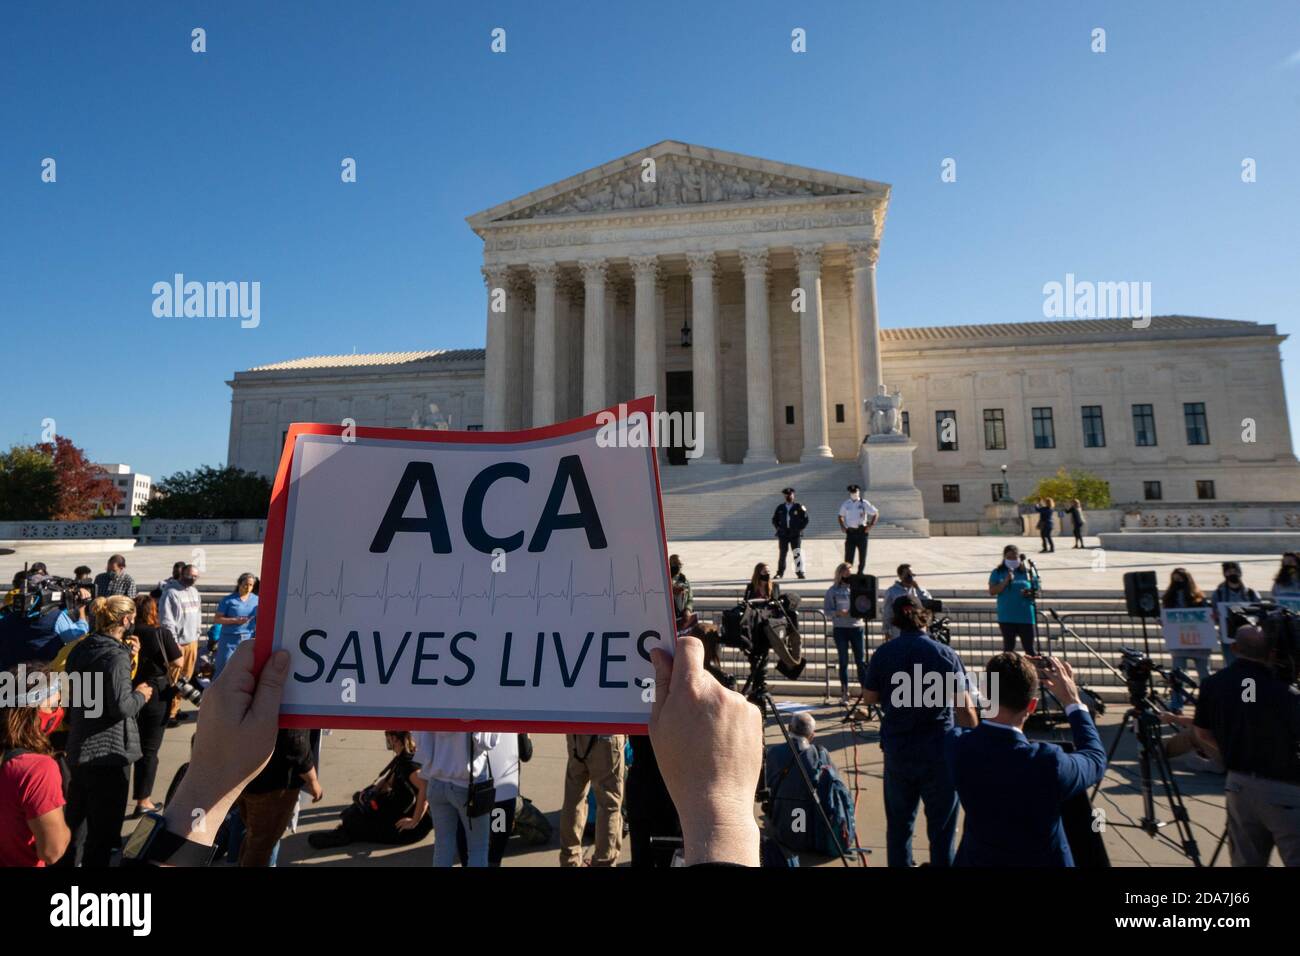 Demonstrators show their support for the Affordable Care Act in front of the Supreme Court in Washington, DC on Tuesday, November 10, 2020.    The Supreme Court is taking oral arguments in a case brought by the Republicans that may invalidate the health care law passed in the Obama administration.      Photo by Ken Cedeno/UPI Stock Photo